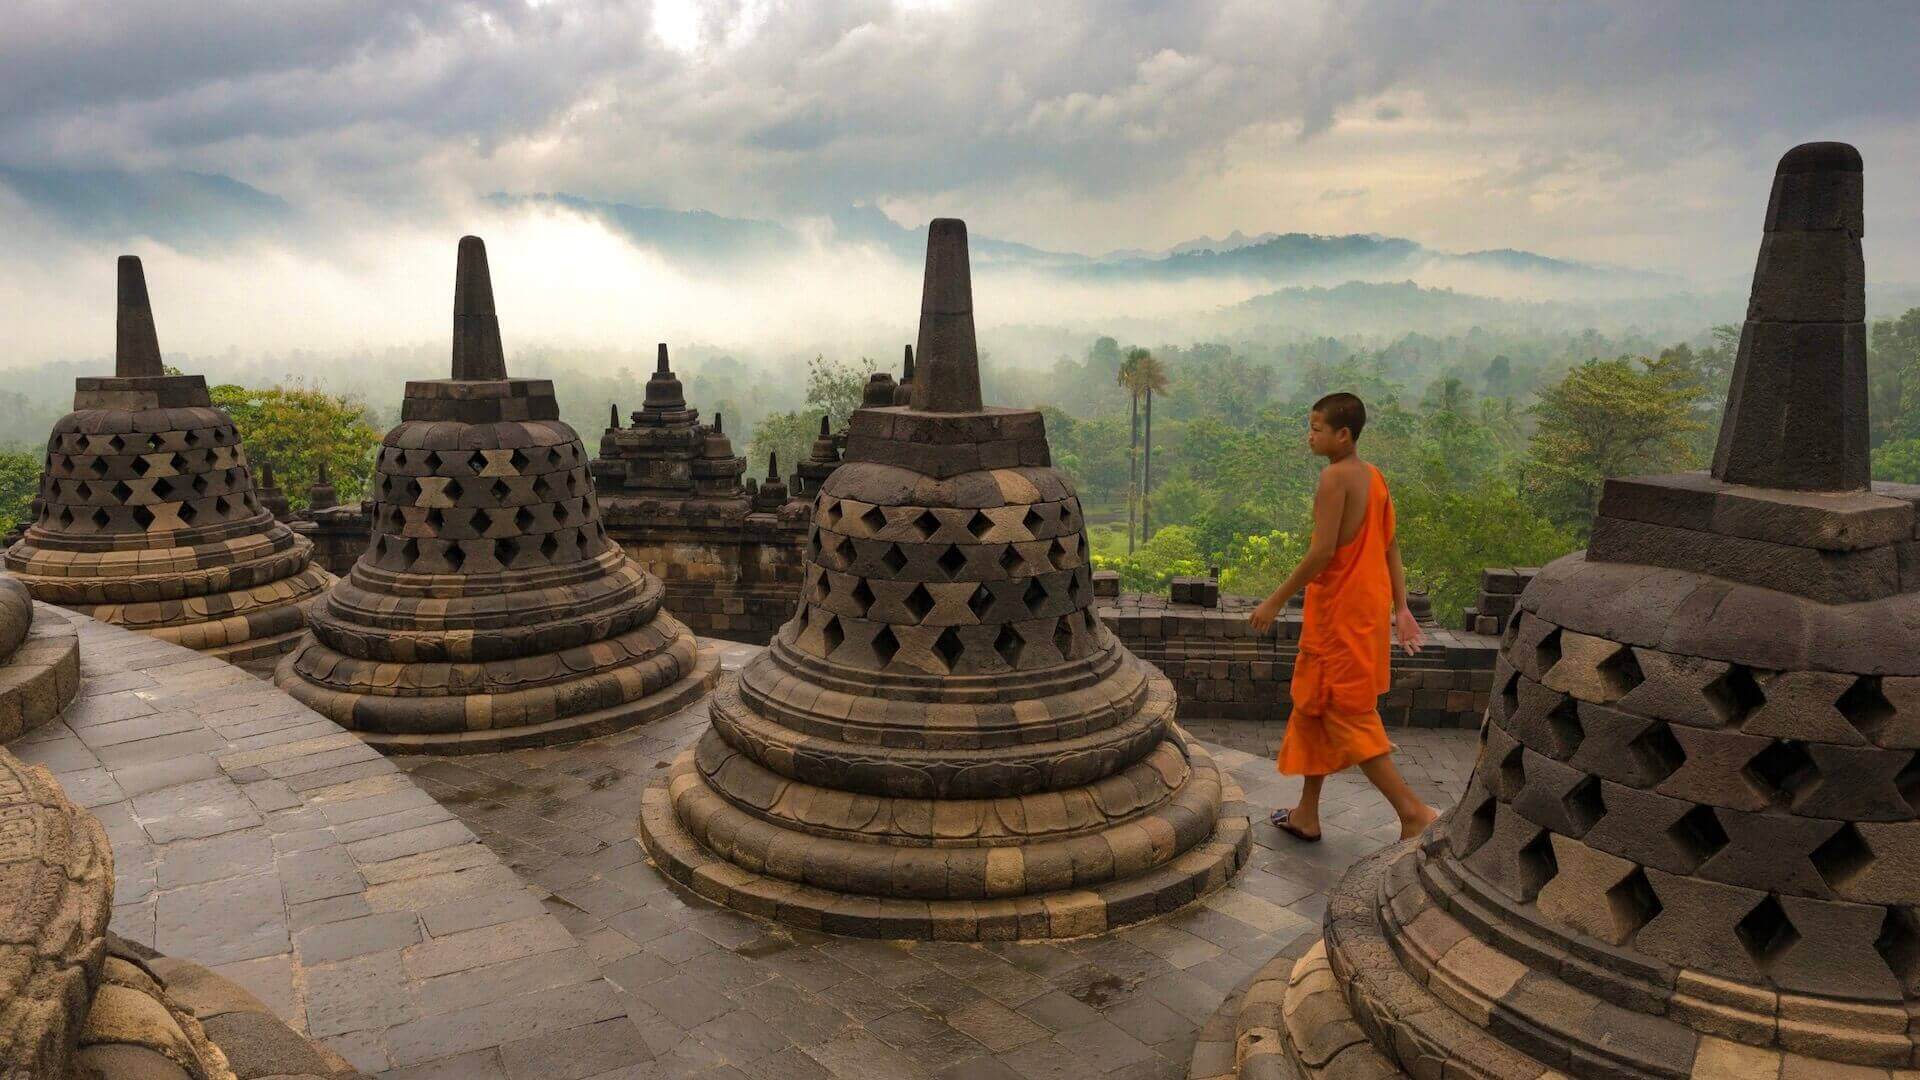 borobudur, one of the most spiritual destinations in the world